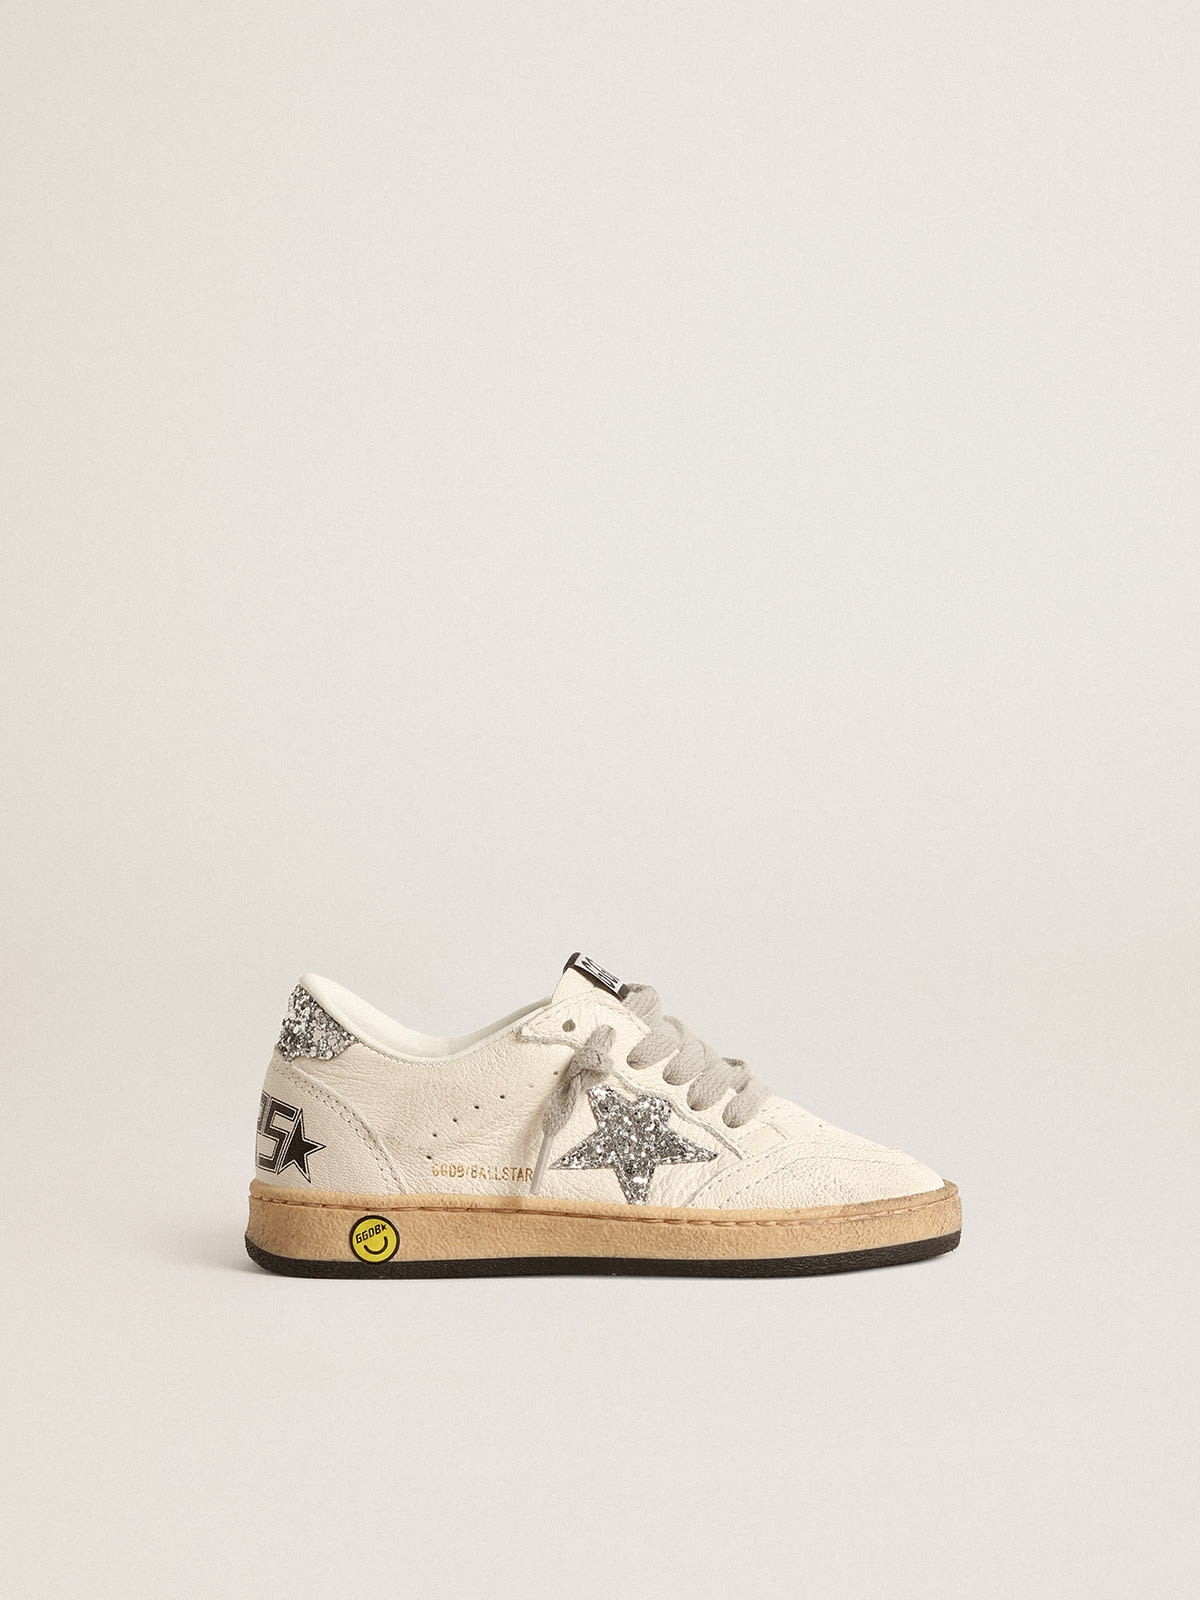 Ball Star Junior in nappa with silver glitter star and heel tab | Golden  Goose